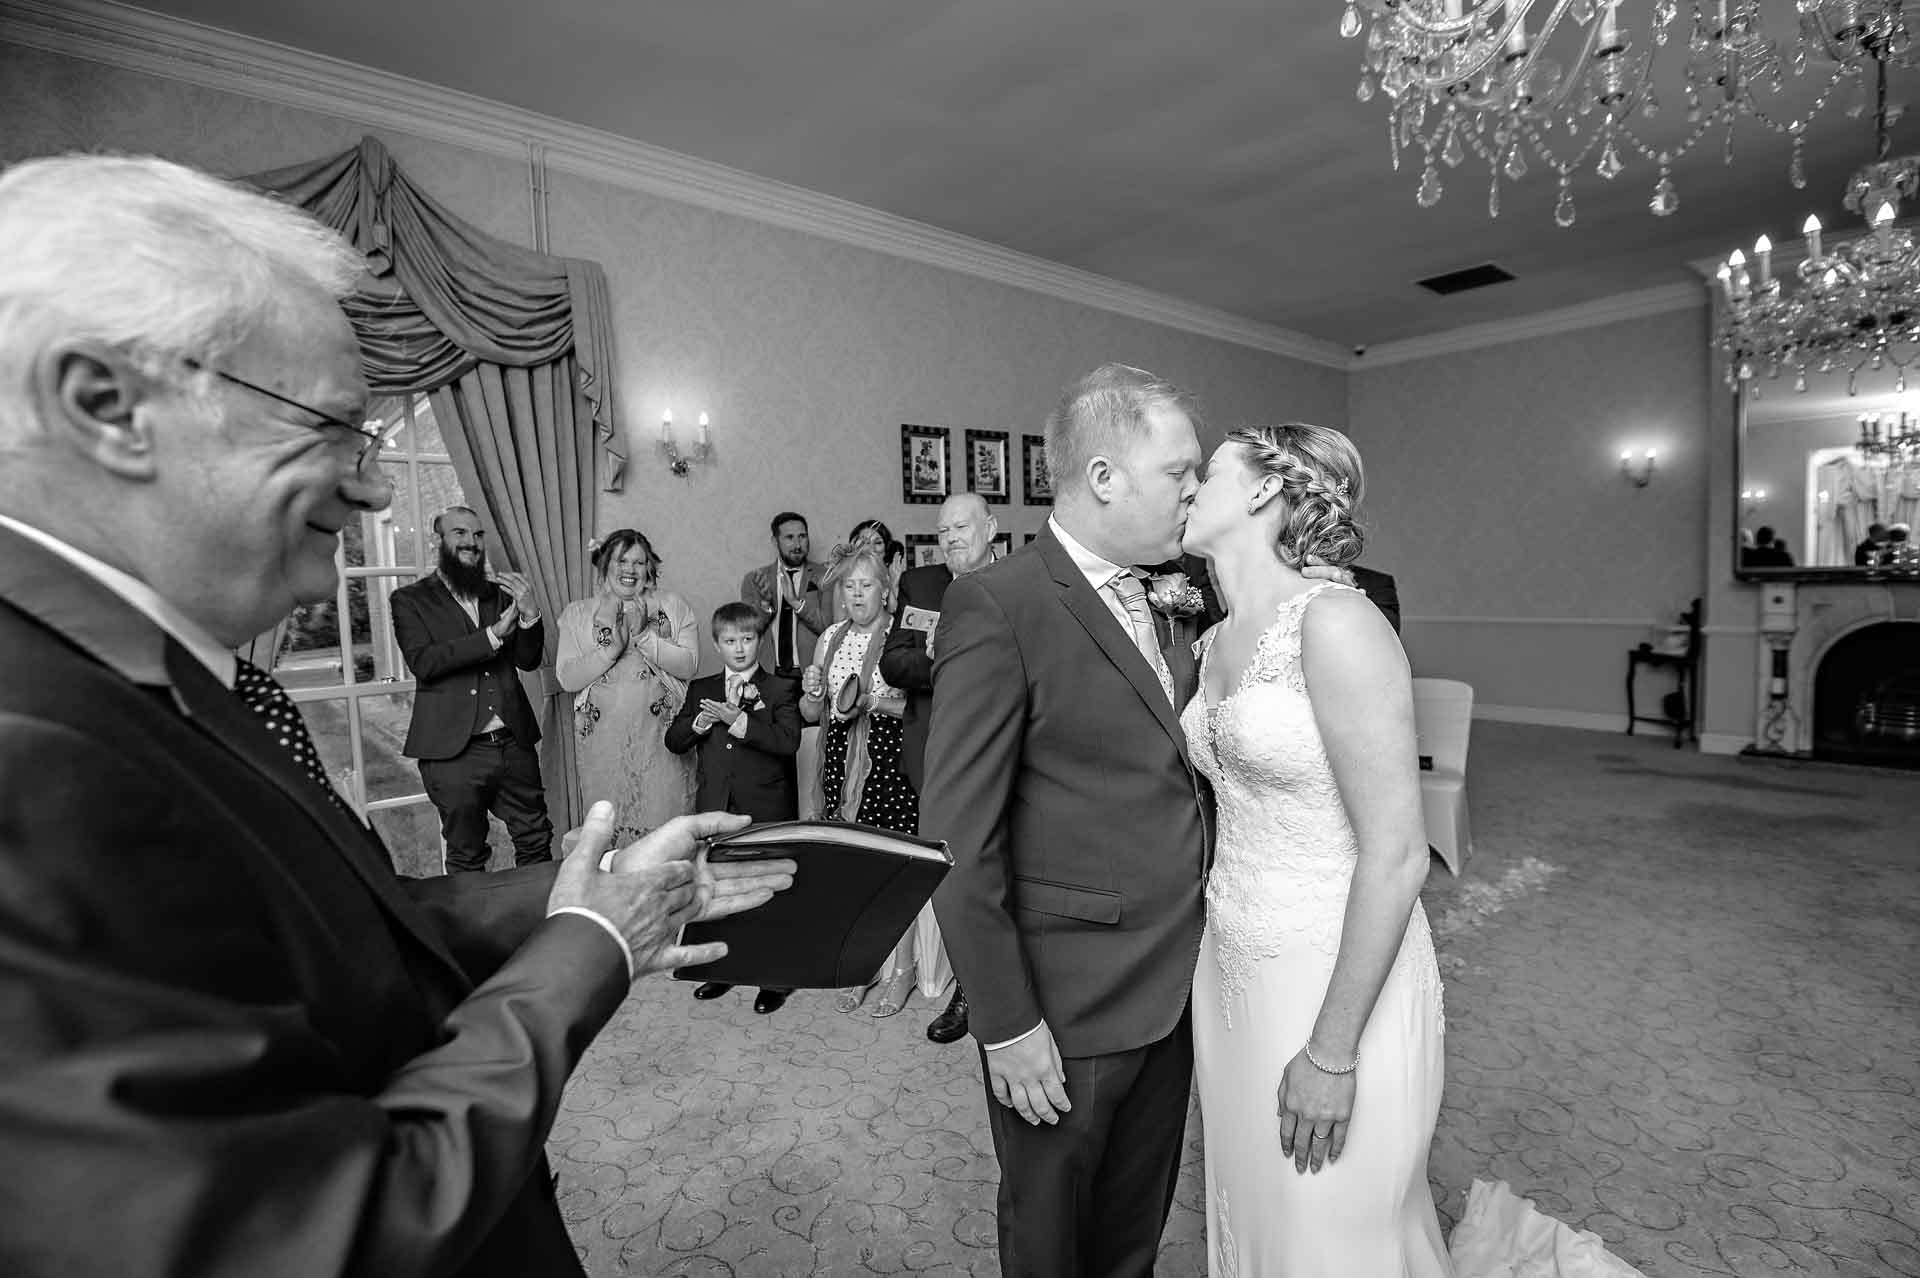 First Kiss at wedding with registrar clapping